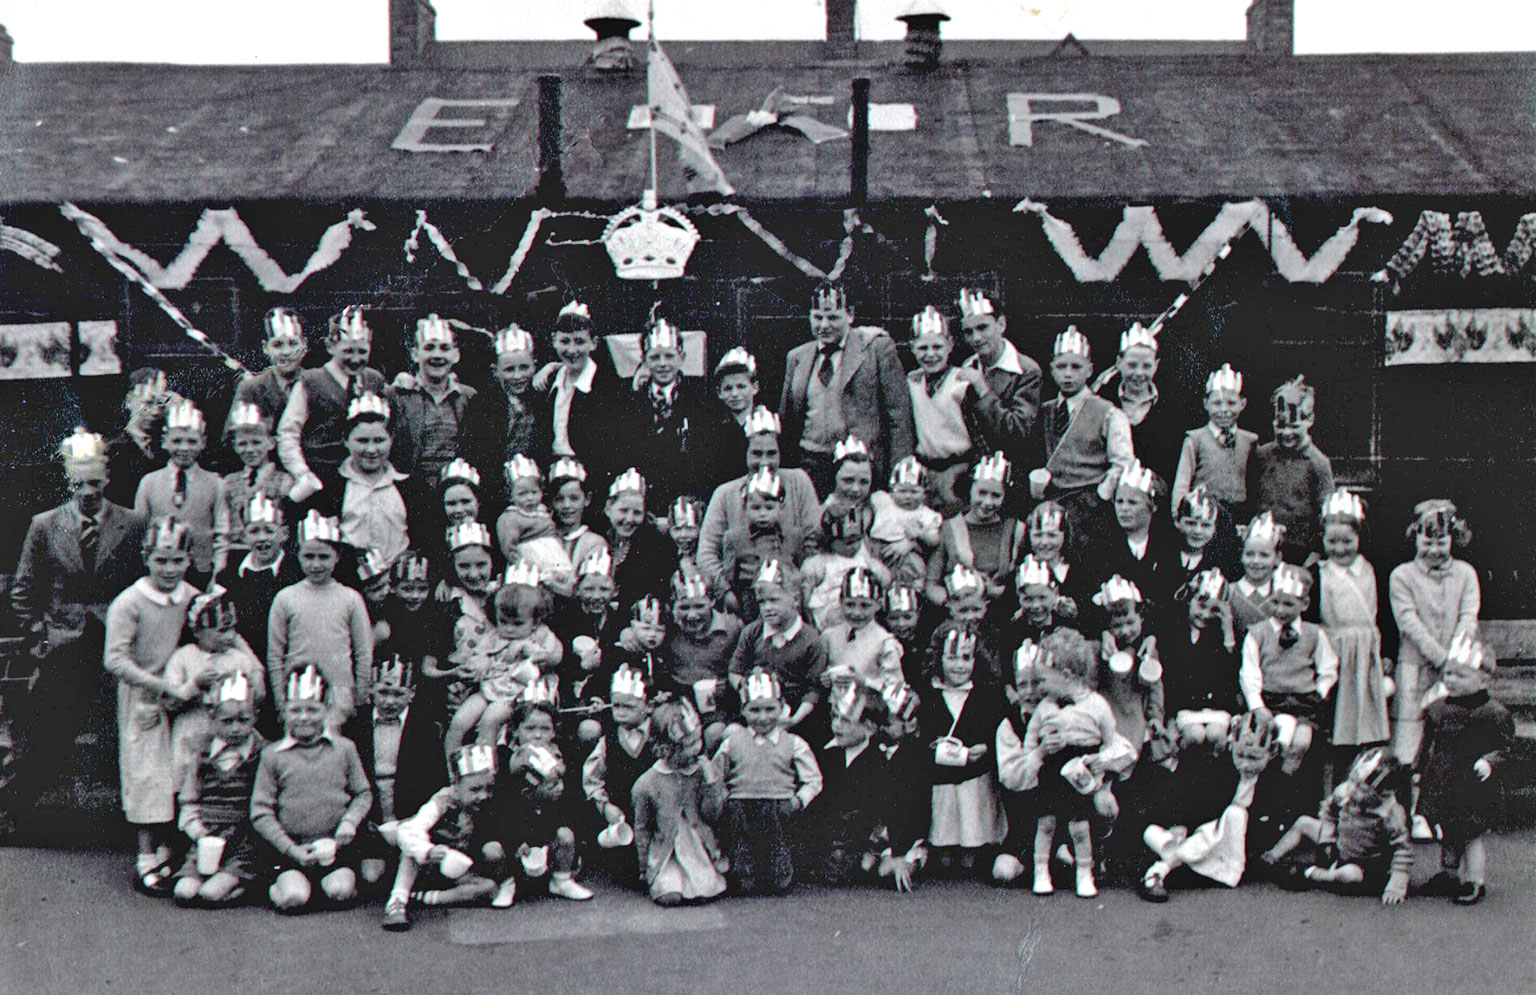 A Group at Piershill Square West celebrates the Coronation of Queen Elizabeth in 1953